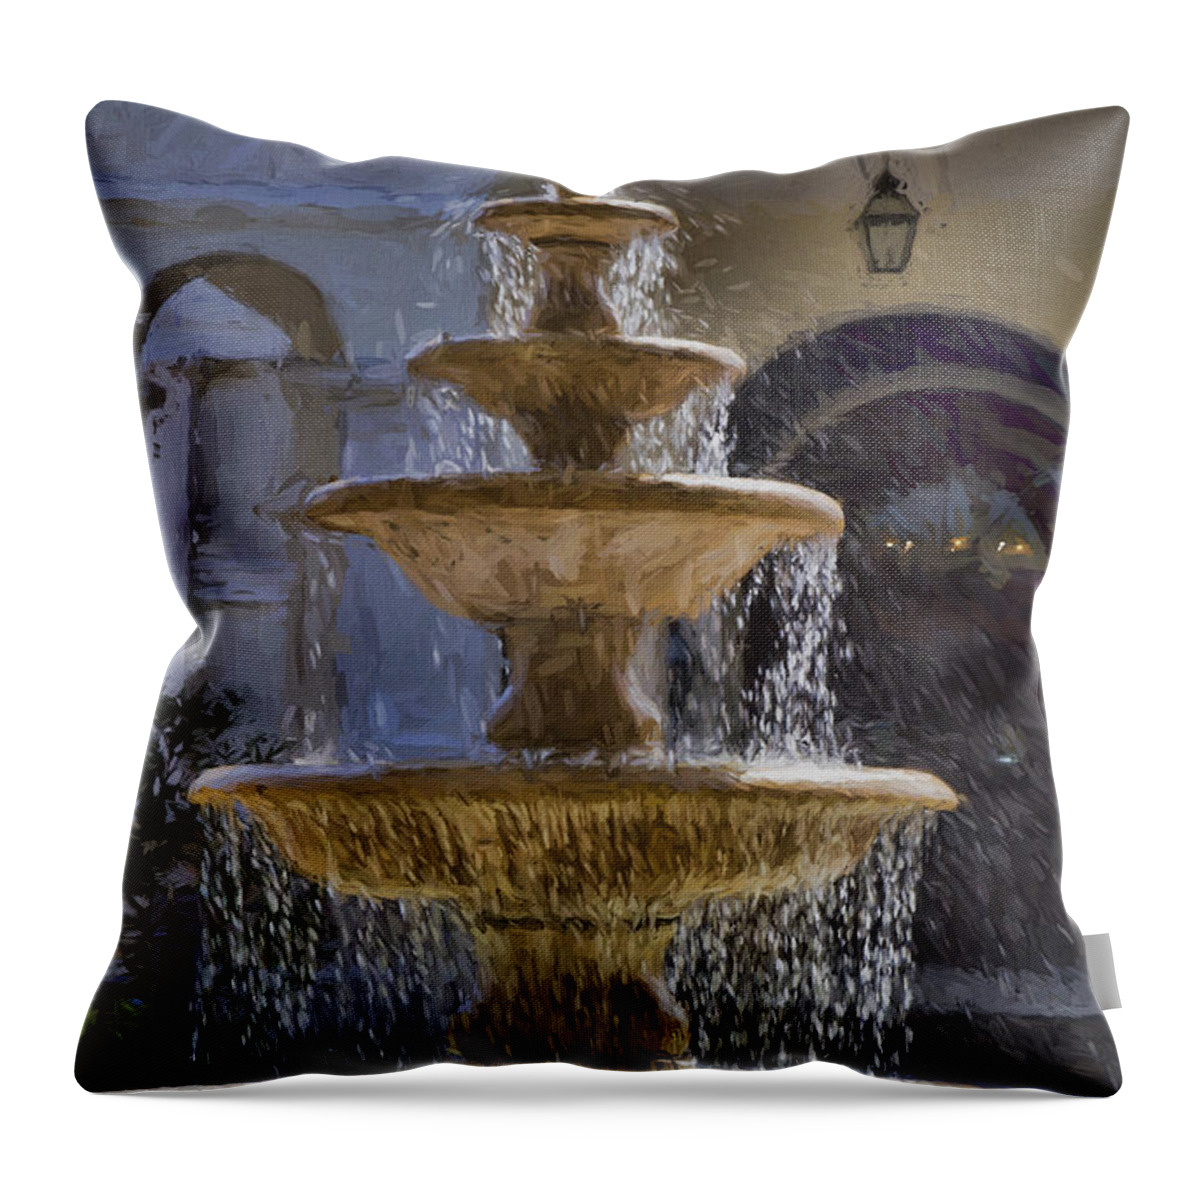 Water Fountain Throw Pillow featuring the painting Ormond Water Fountain by Deborah Benoit